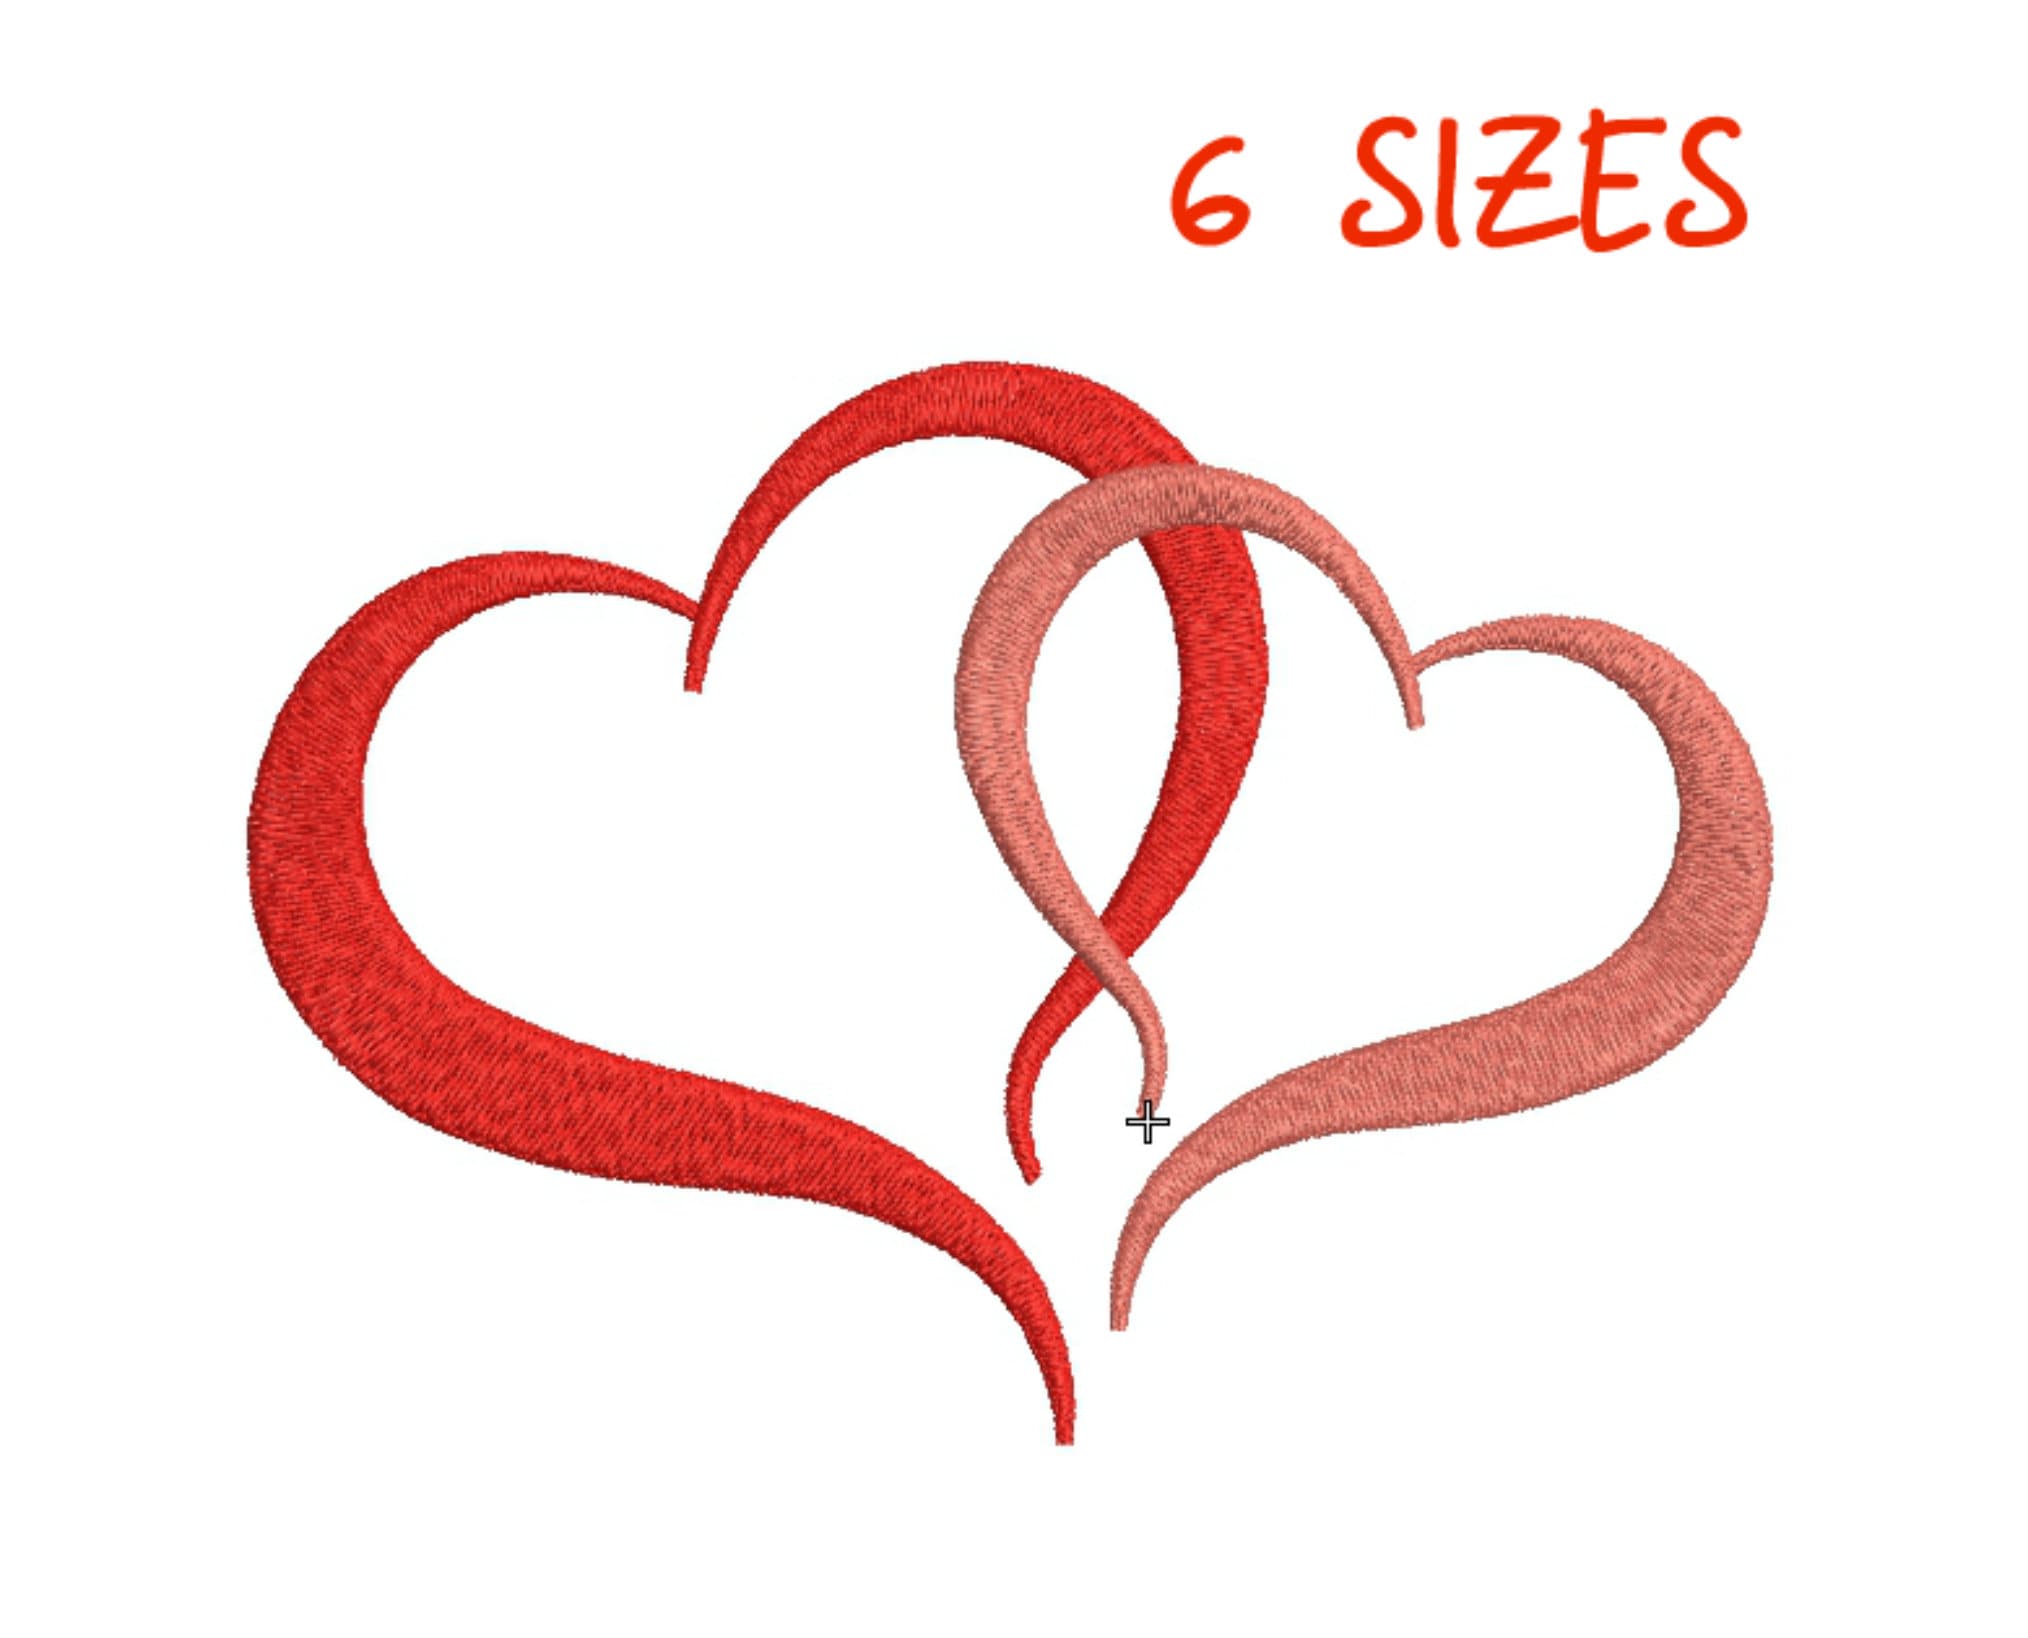 Red Heart Svg, Red Hand Drawn Heart Svg, Valentine's Day Svg, Love Svg. Cut  File Cricut, Png Pdf Eps, Vector, Stencil, Decal, Sticker.